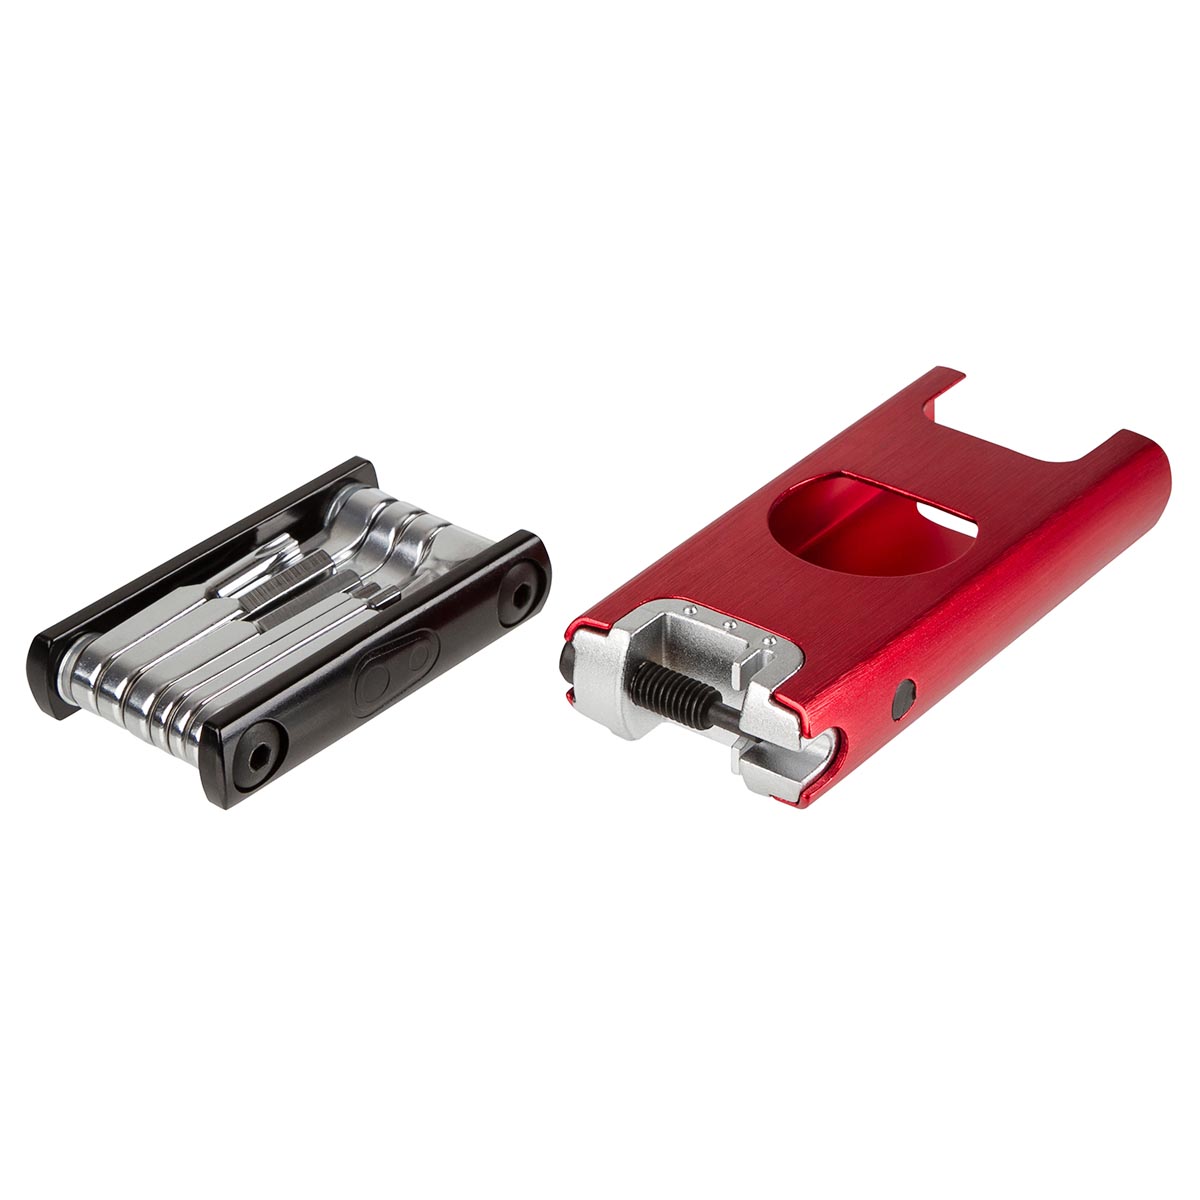 Crankbrothers Chiavi Multiuso F15 Syndicate Edition, Red